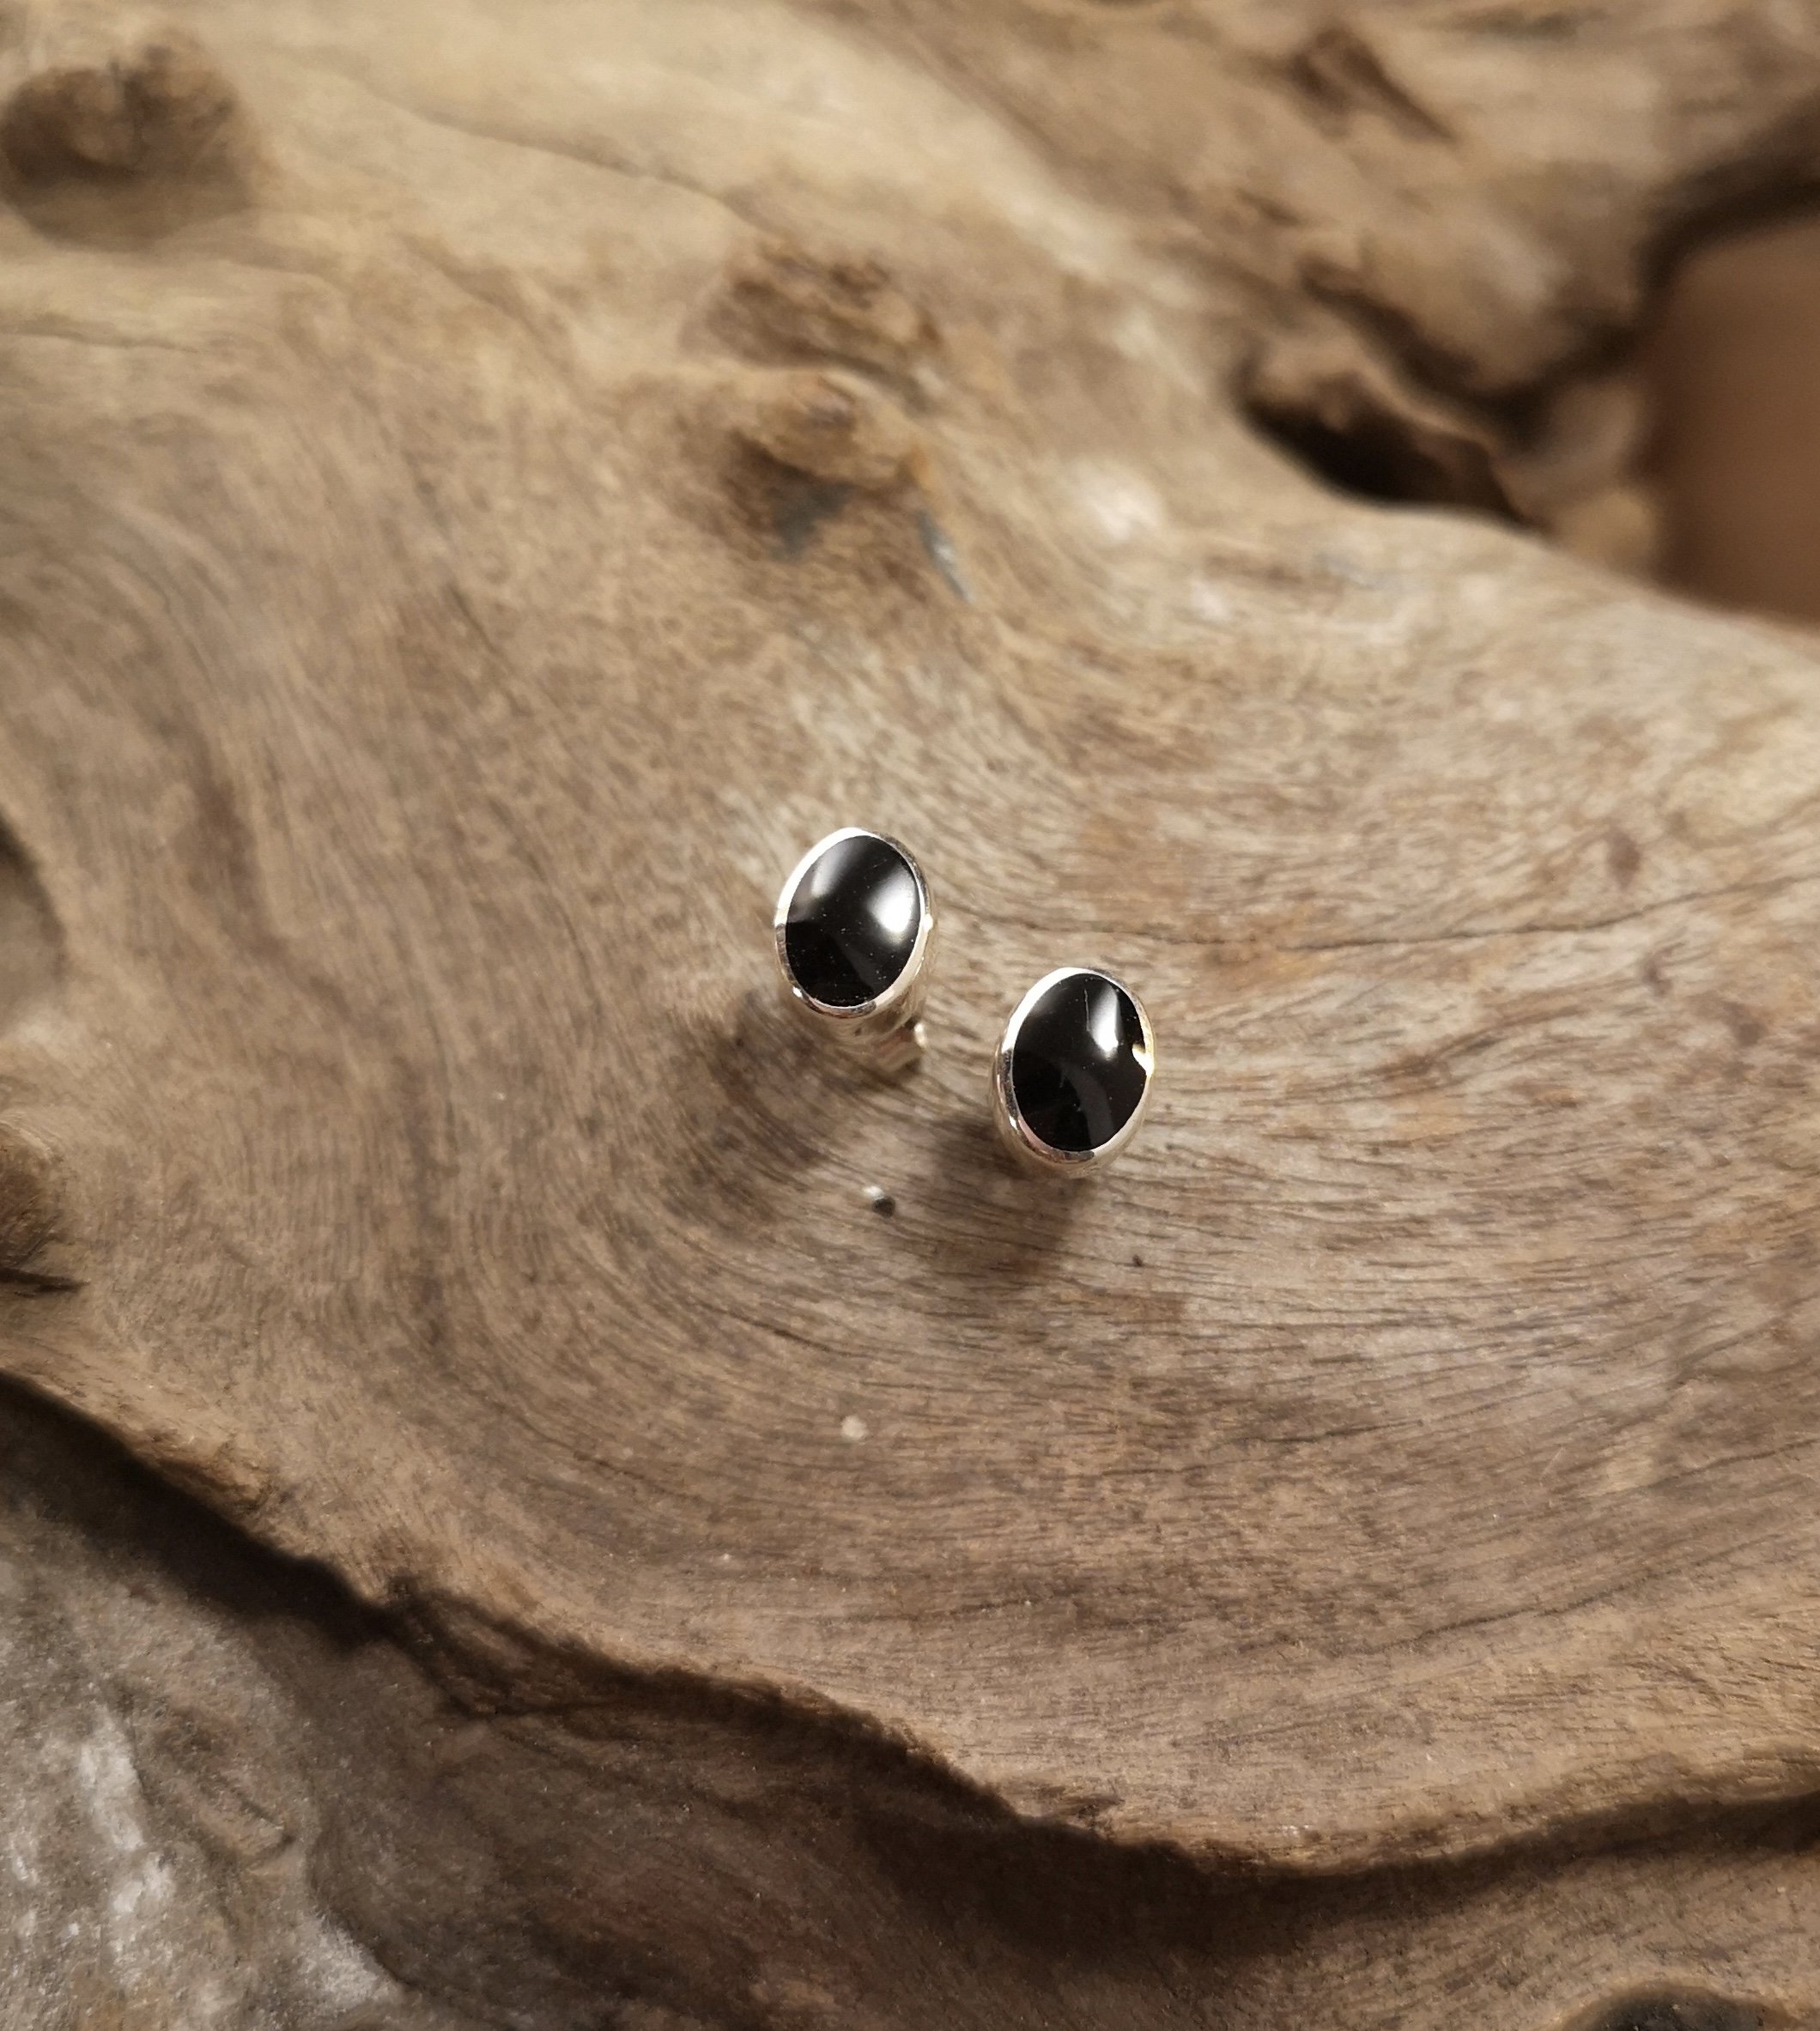 Small oval studs